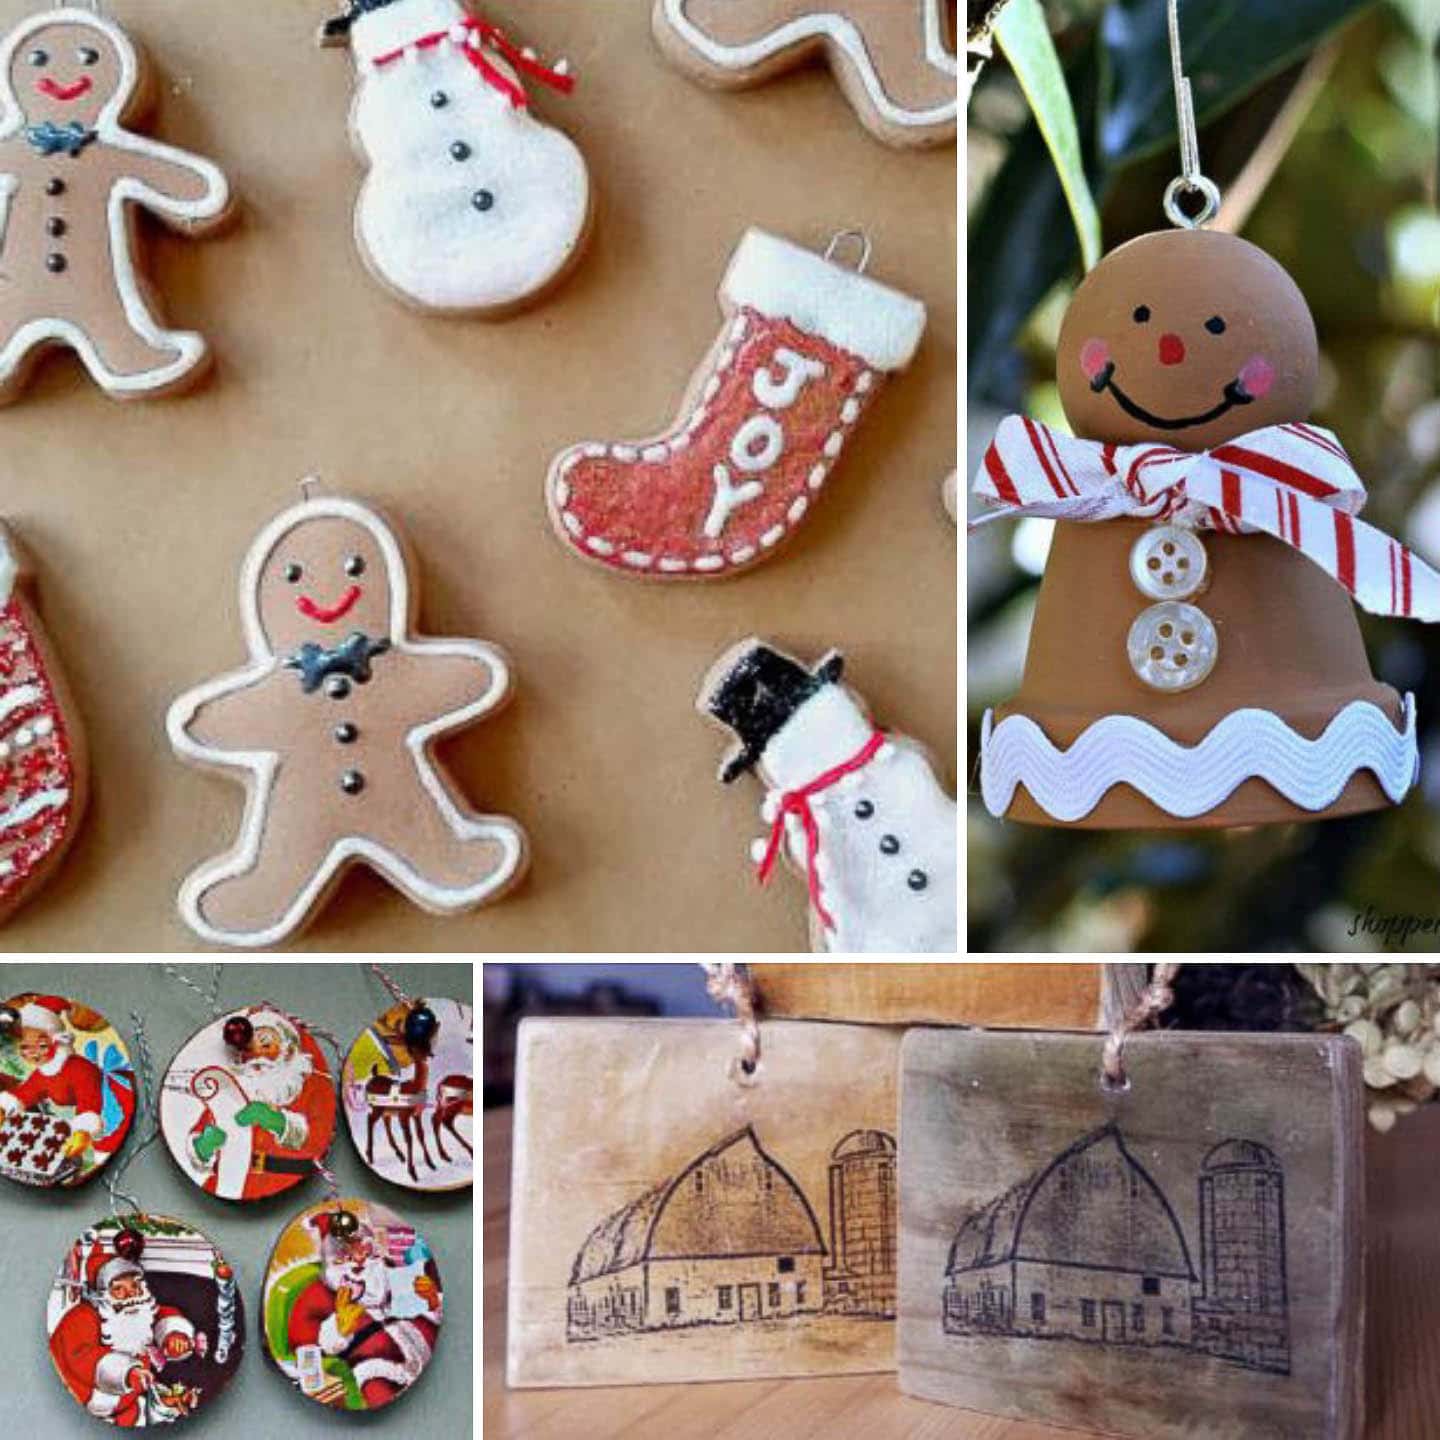 Baking soda gingerbread ornaments, Clay pot gingerbread man ornament, recycled little golden book ornaments, and farmhouse christmas tree ornaments